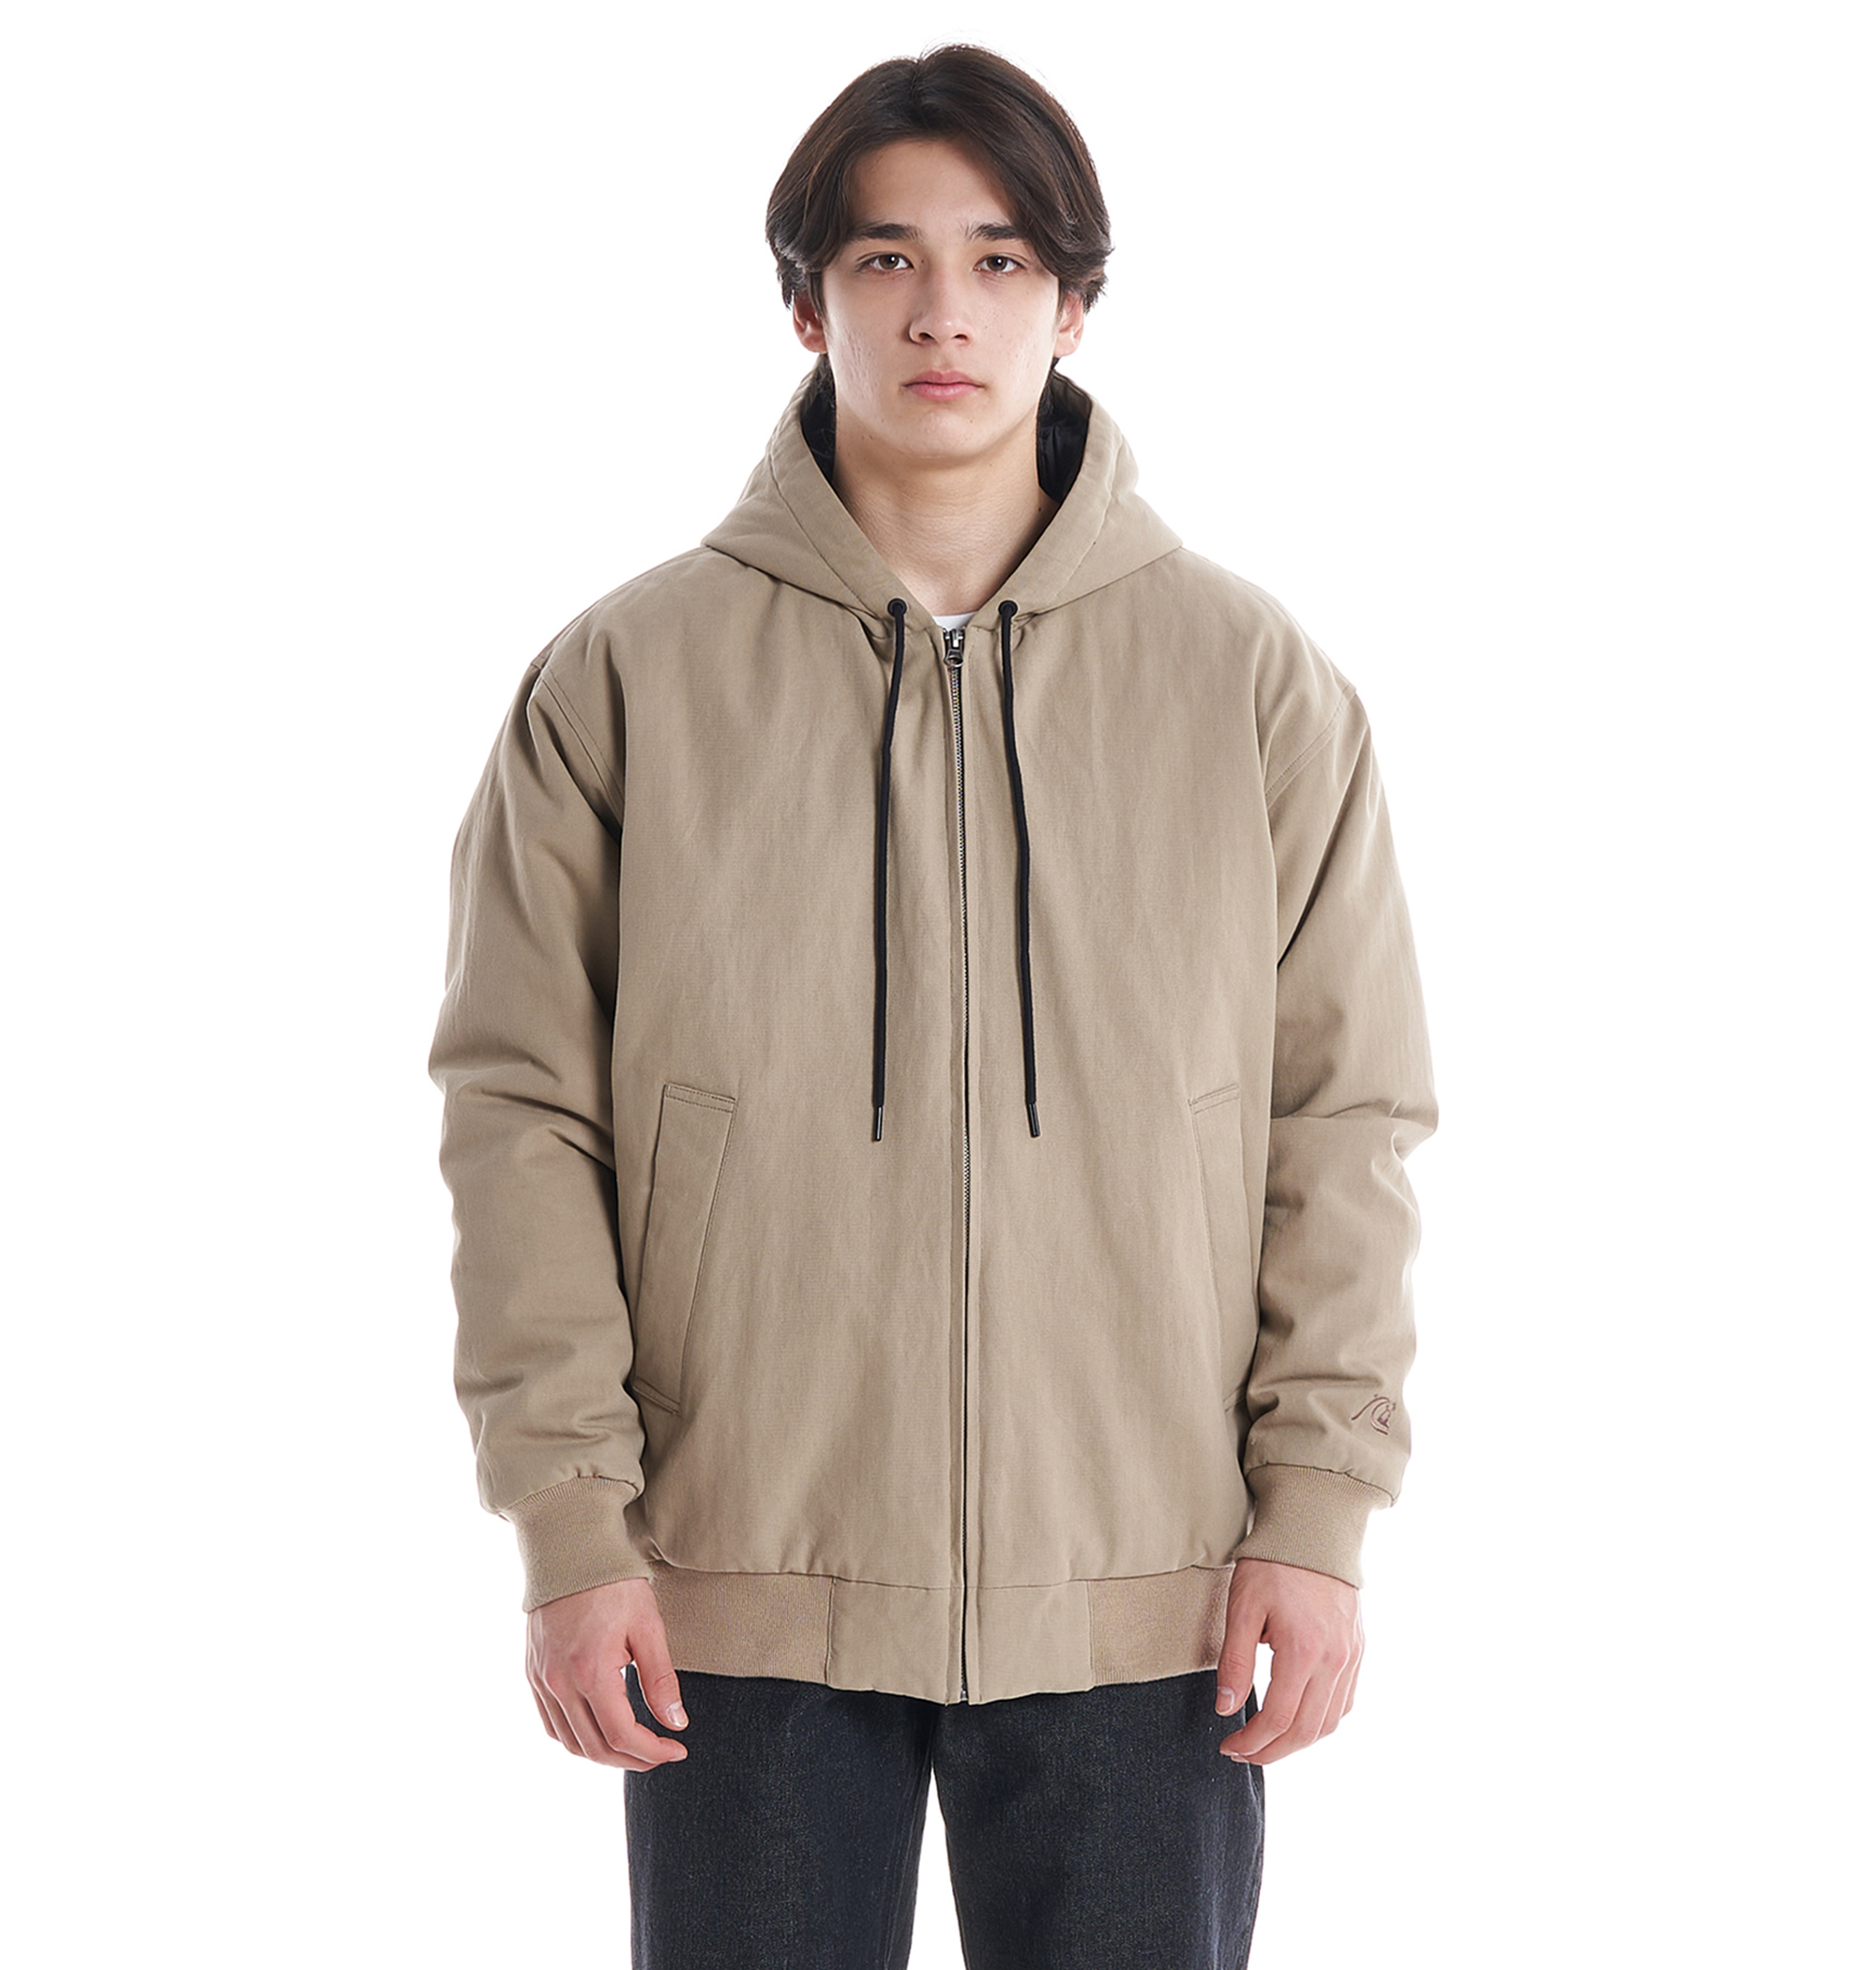 30%OFF セール SALE Quiksilver クイックシルバー 【OUTLET】LIFES QUIK JACKET アウター 冬物 防寒